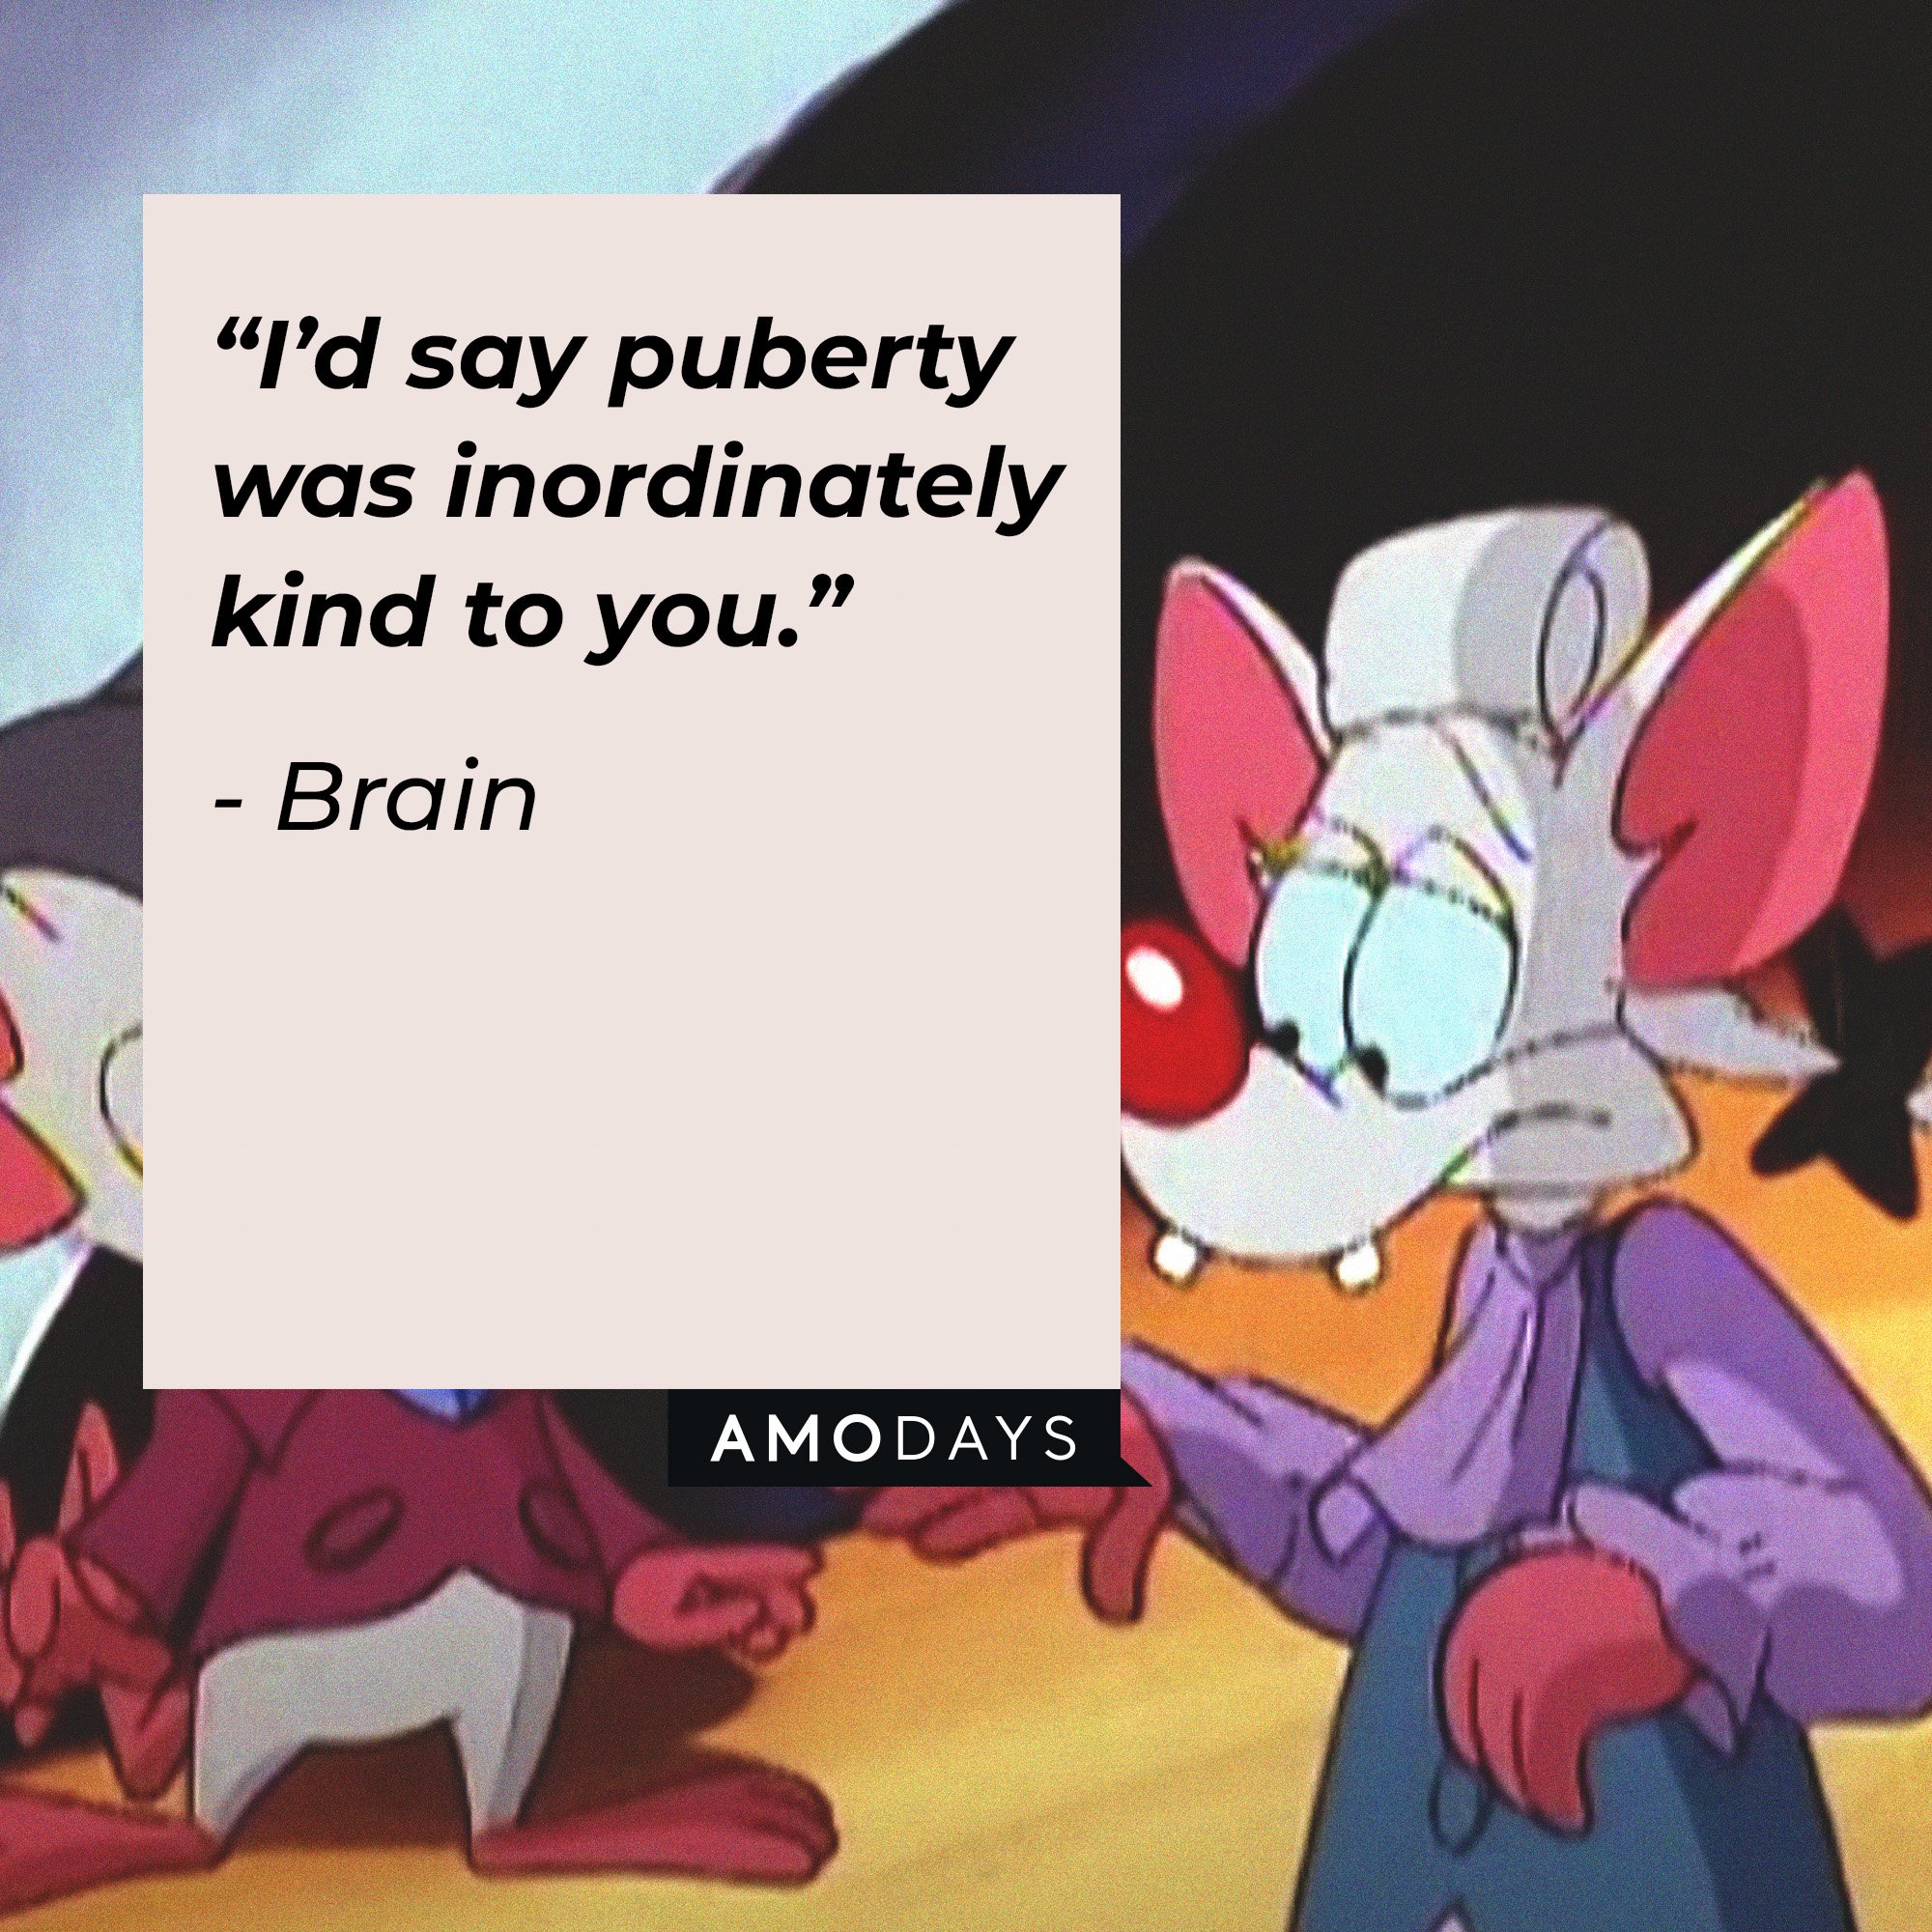 Brain's quote: “I’d say puberty was inordinately kind to you.” | Image: AmoDays